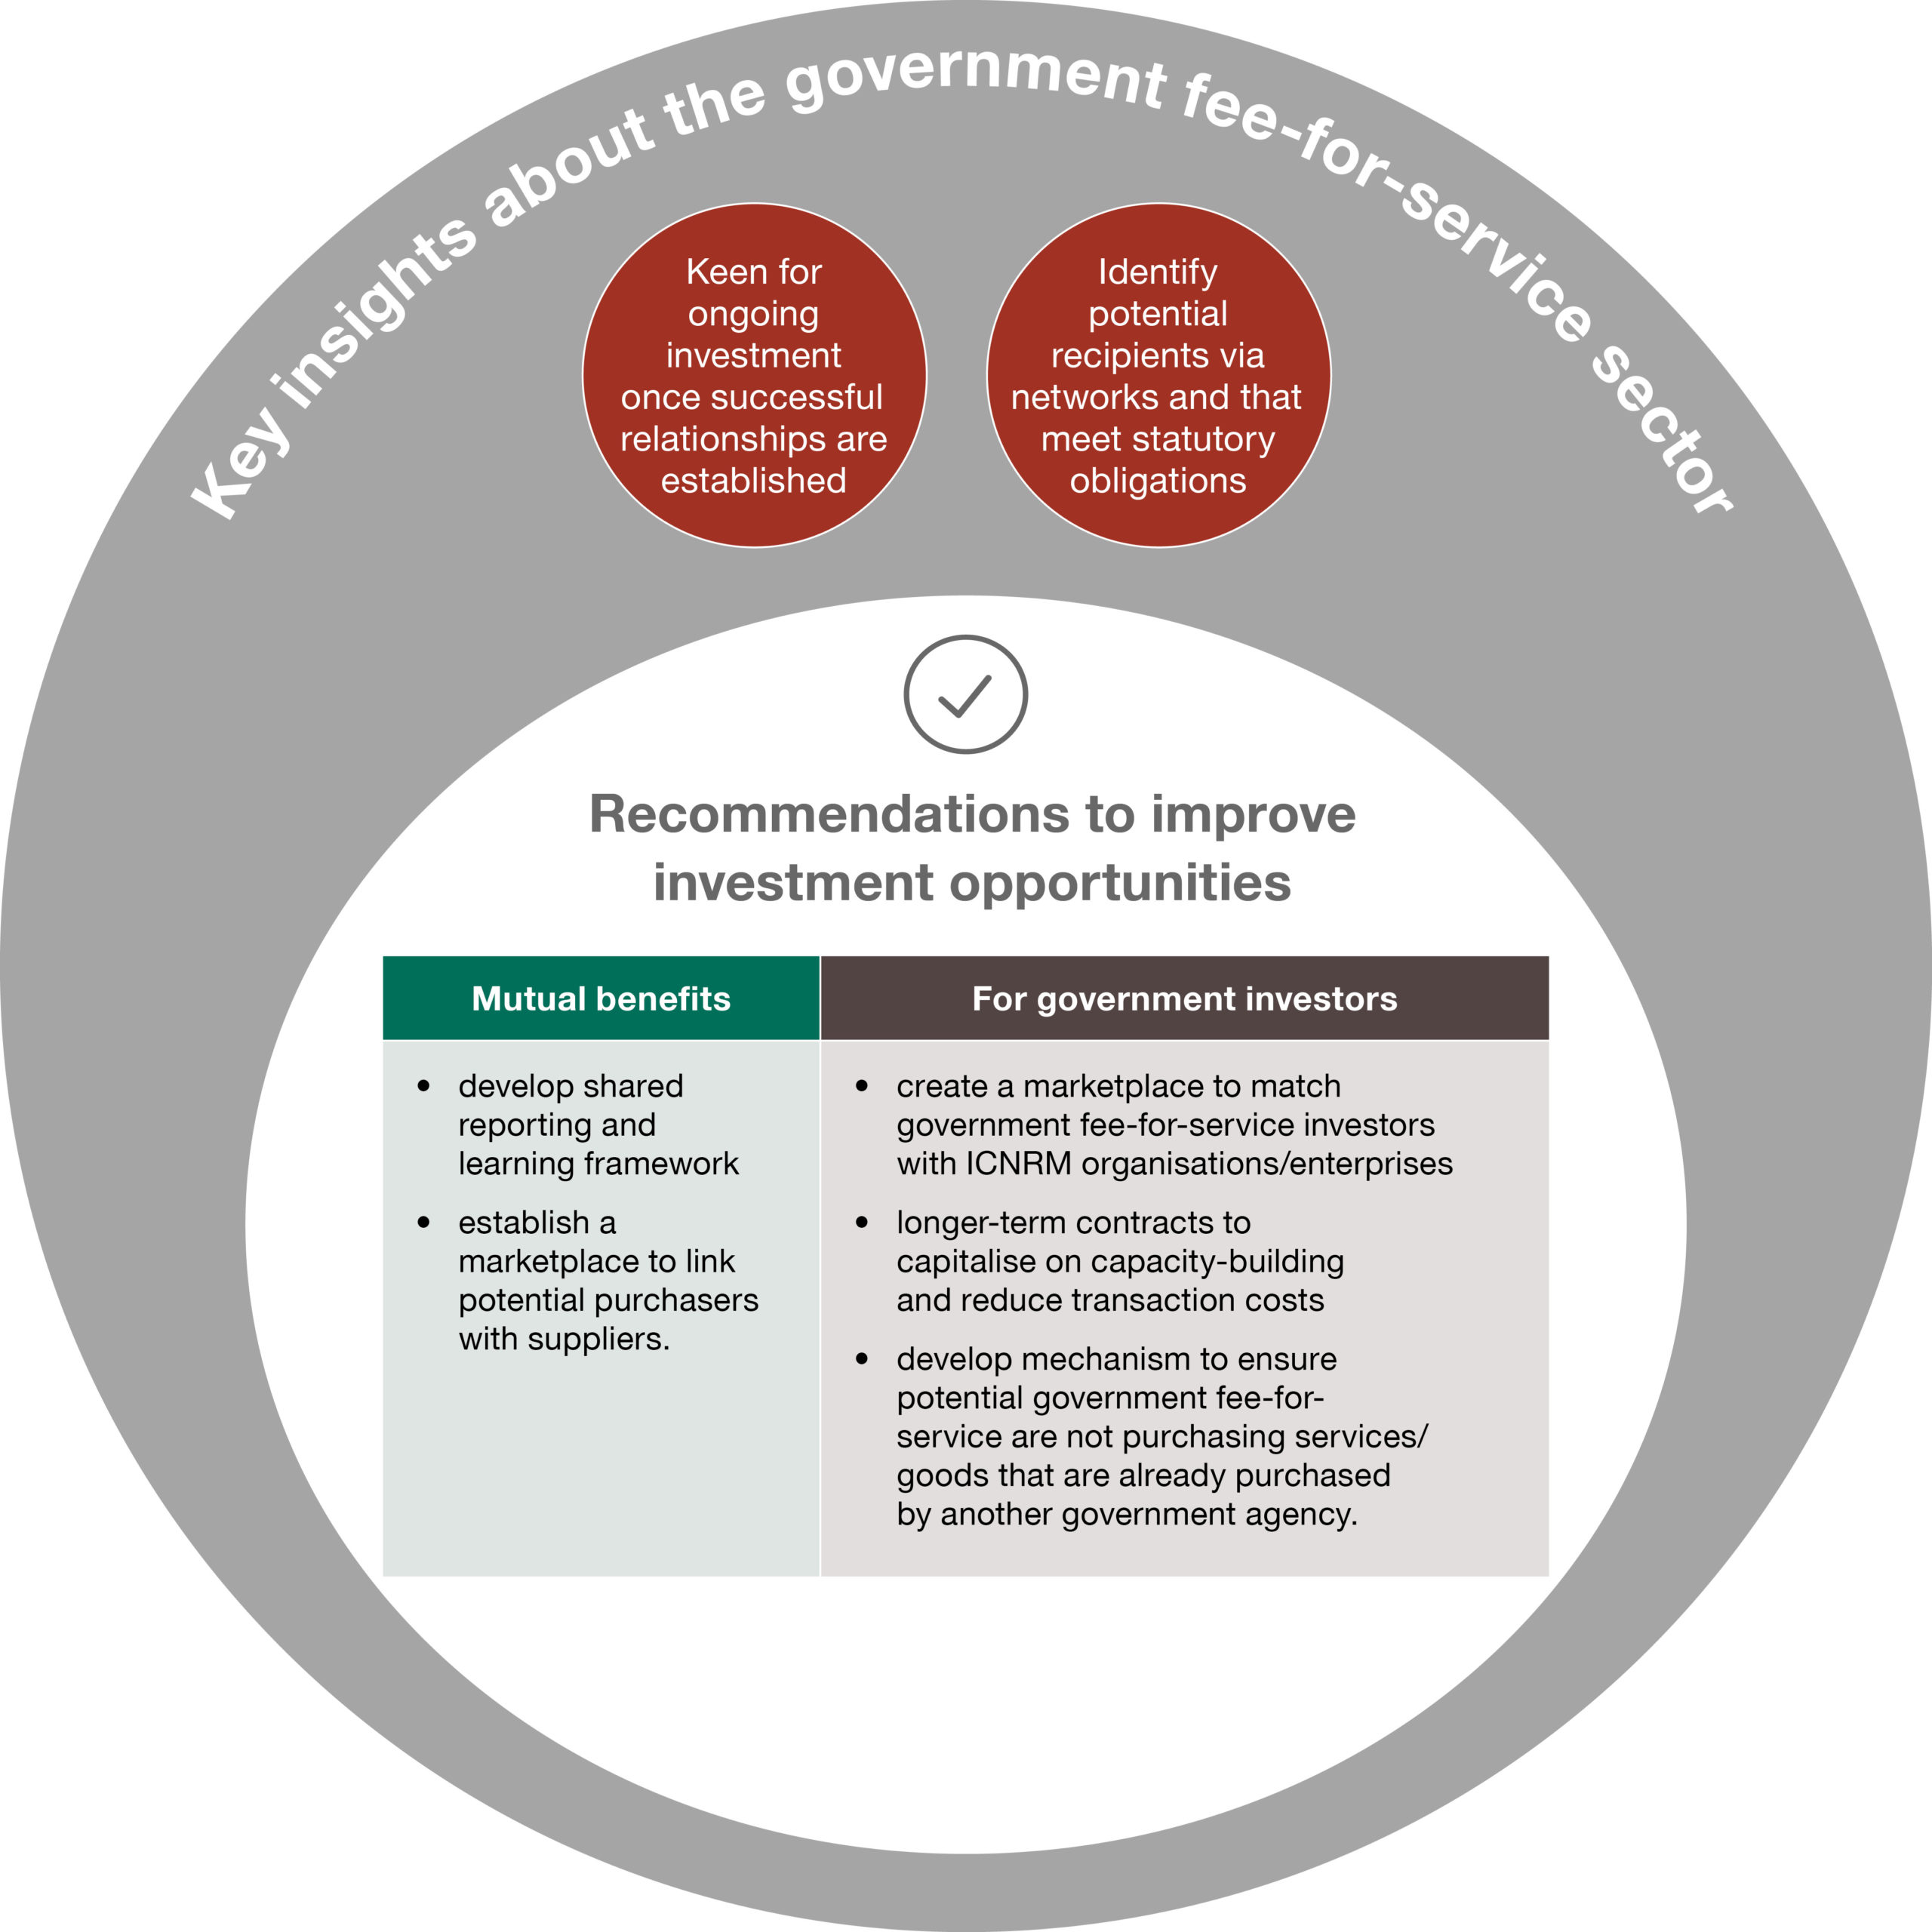 Figure 3. Key insights and recommendations to increase investment opportunities between the ICNRM and the government fee-for-service sectors.